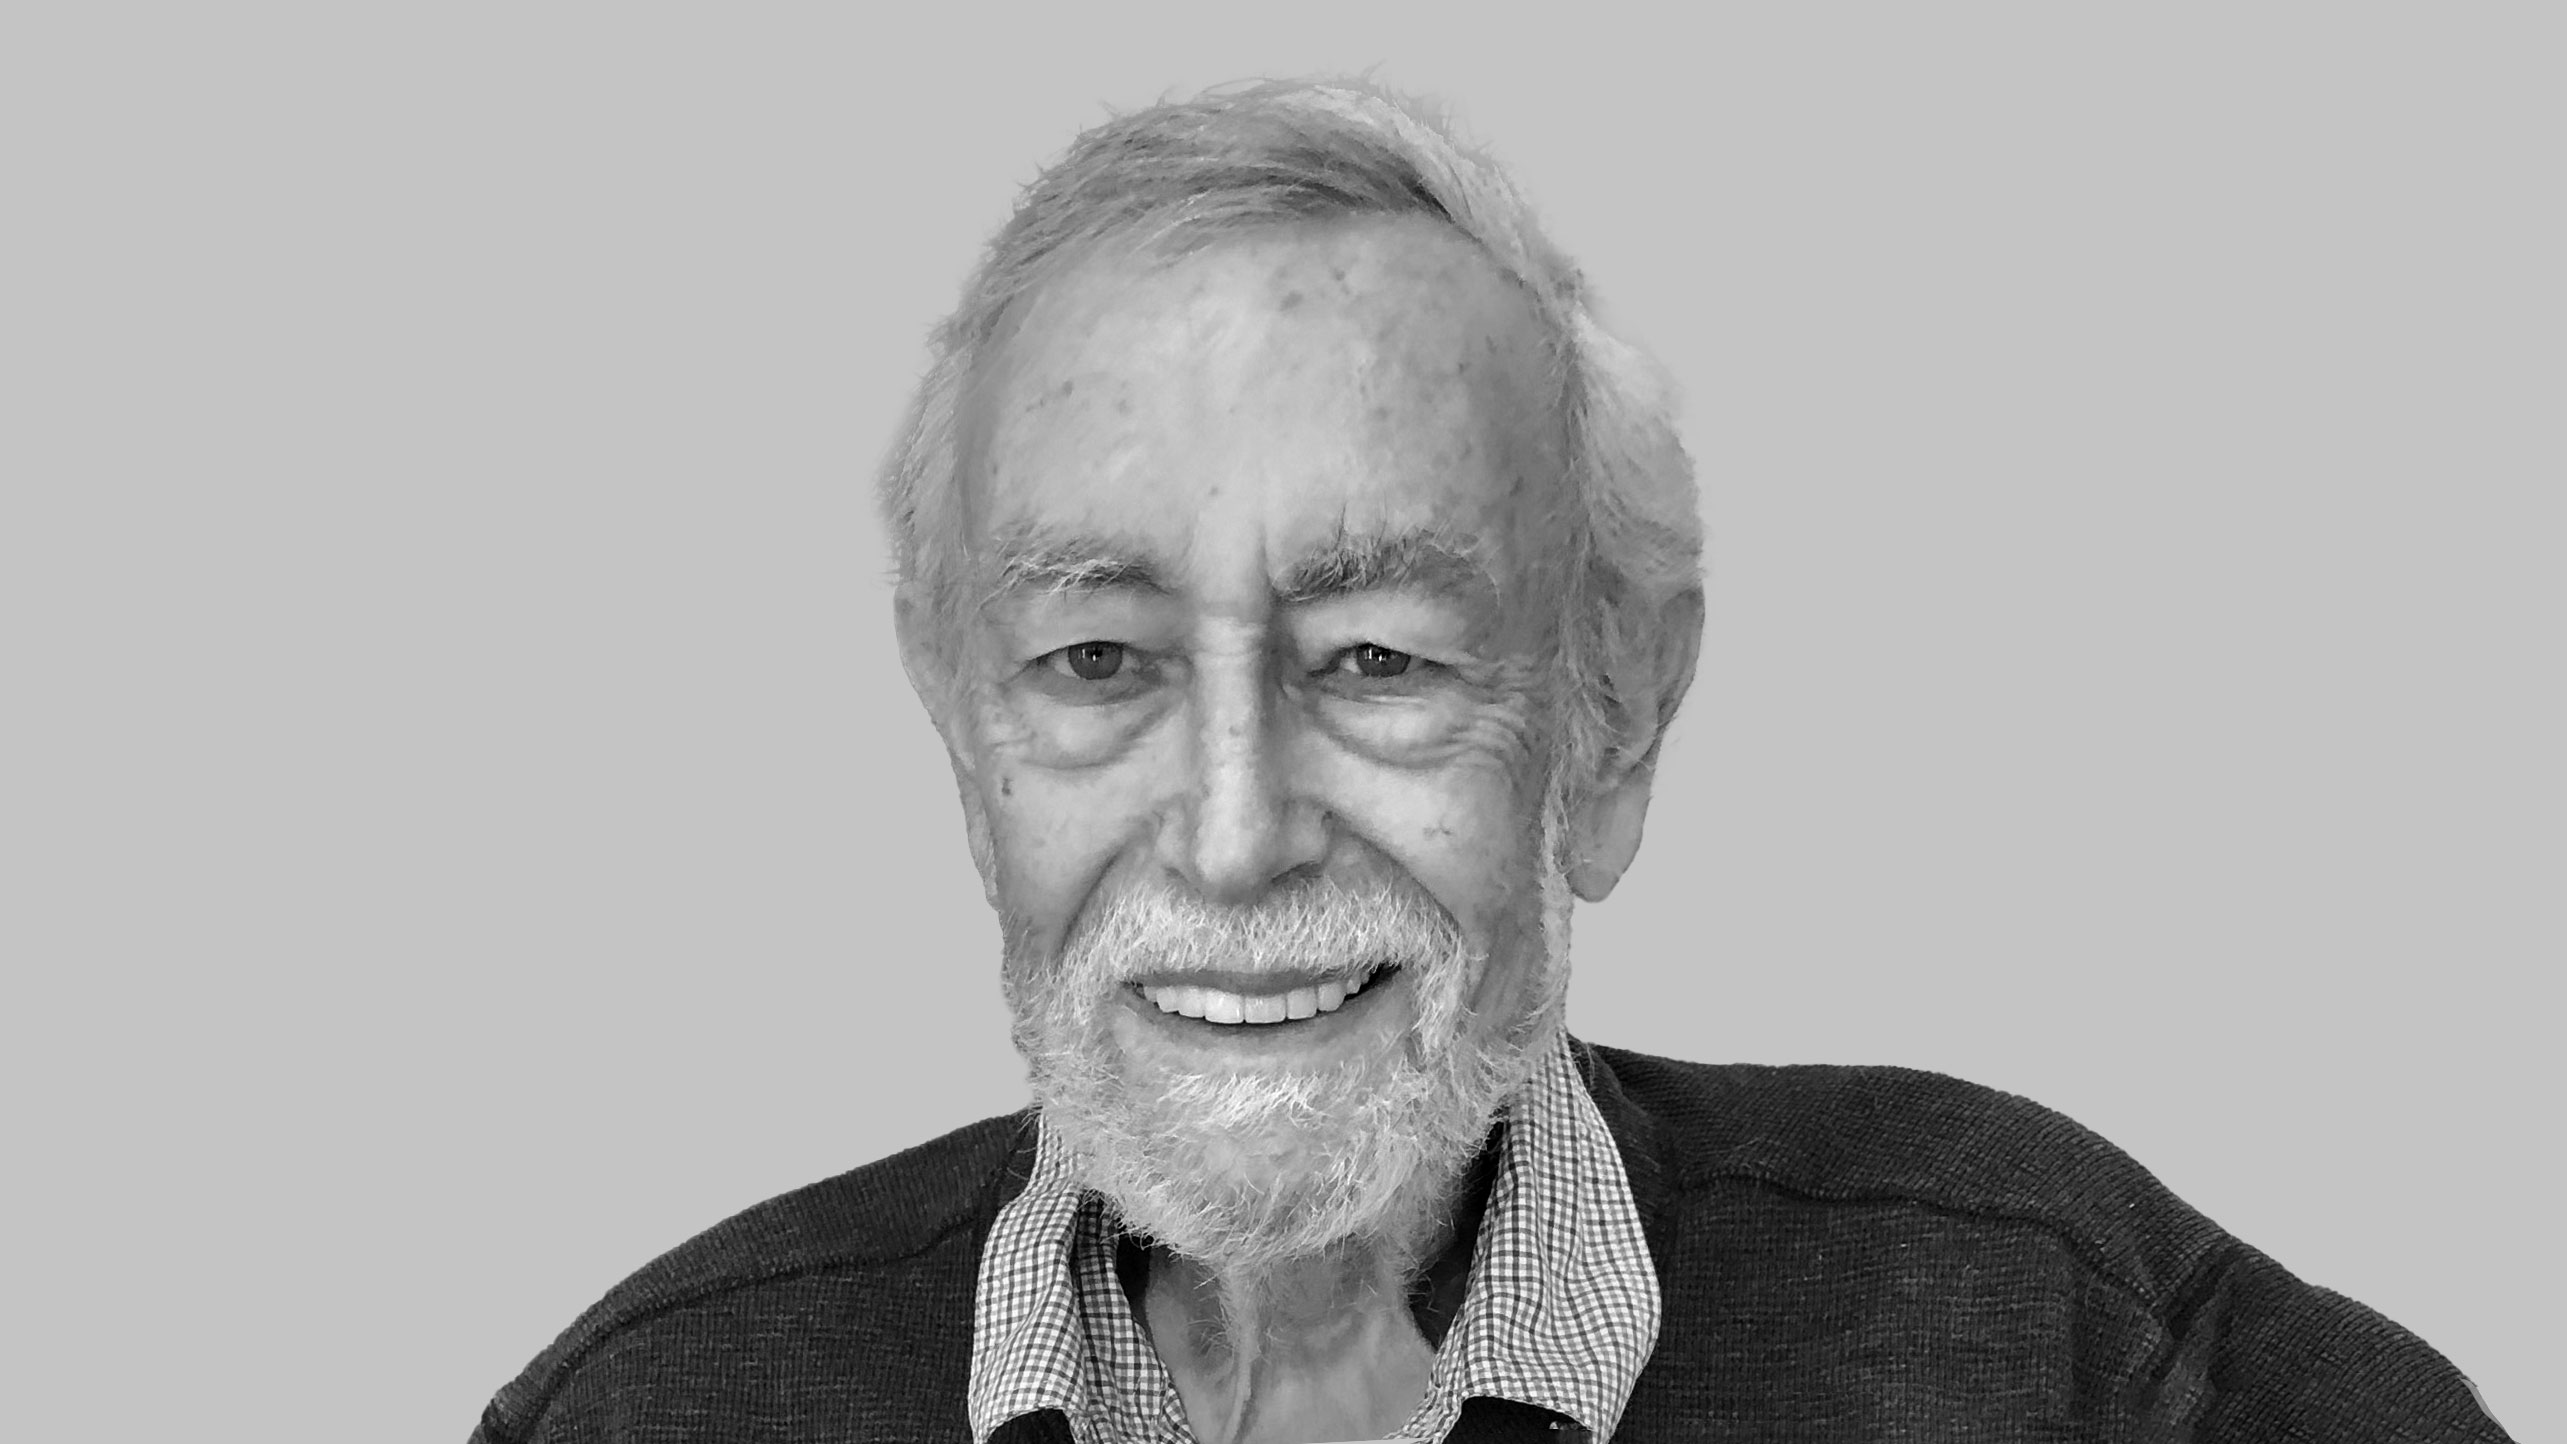 Howard Rosenthal, whose research revolutionized the analysis of Congressional voting records and political polarization, dies at 83